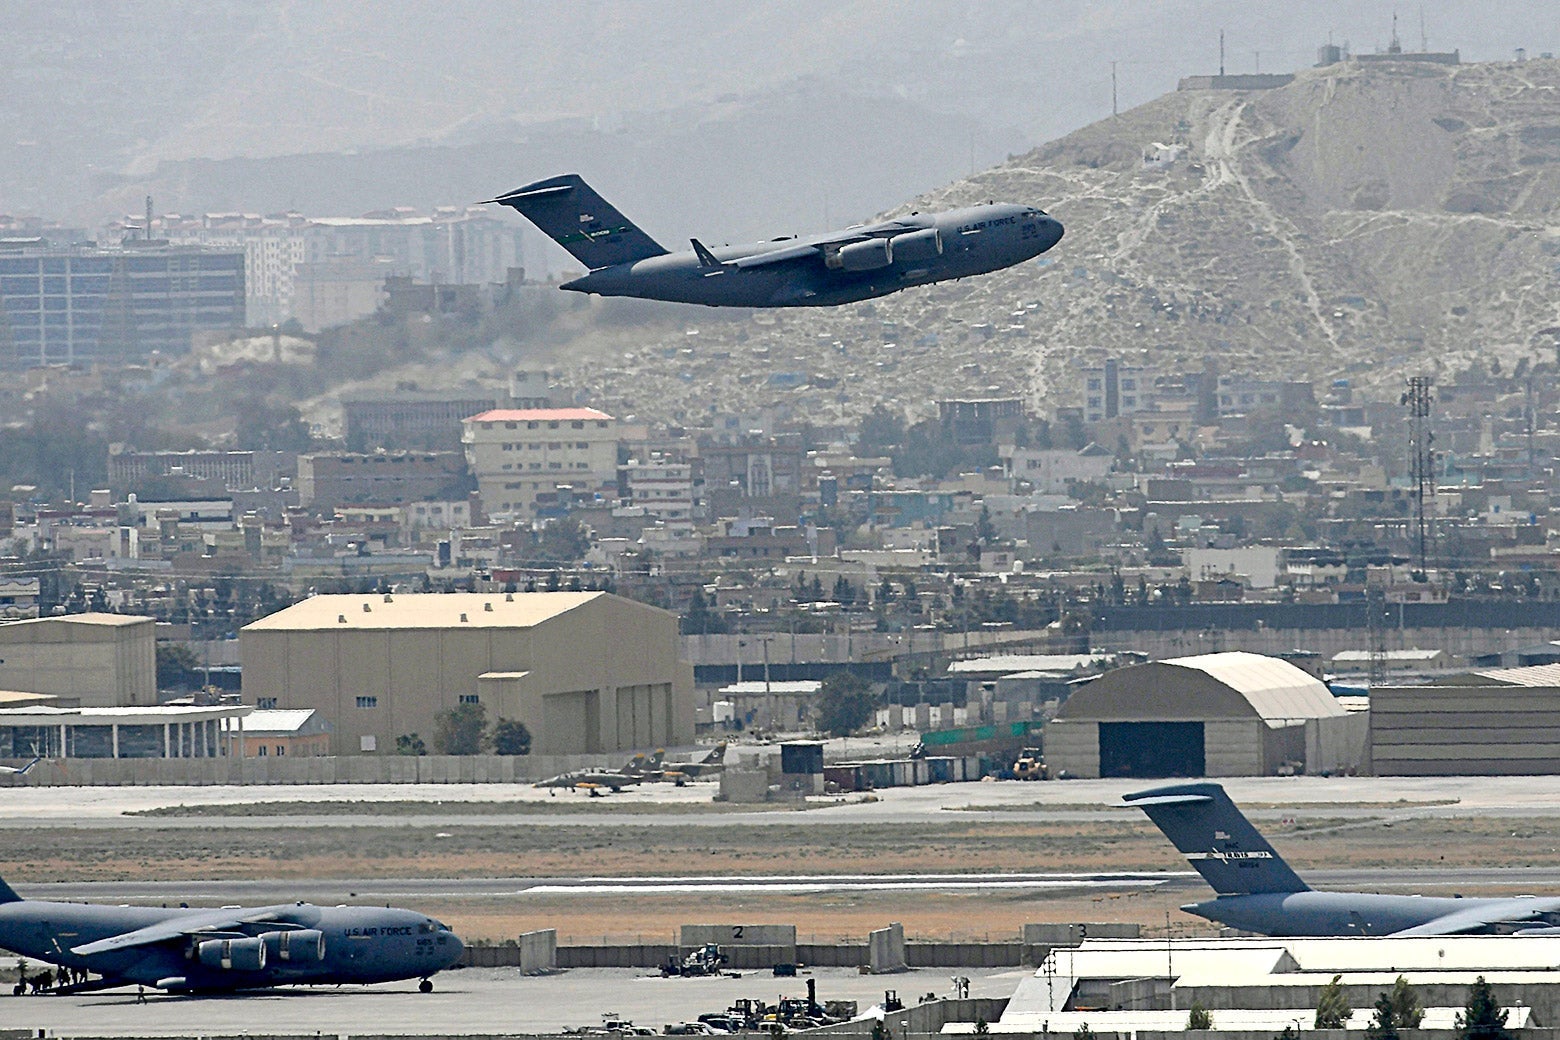 An U.S. Air Force aircraft takes off from the airport in Kabul.